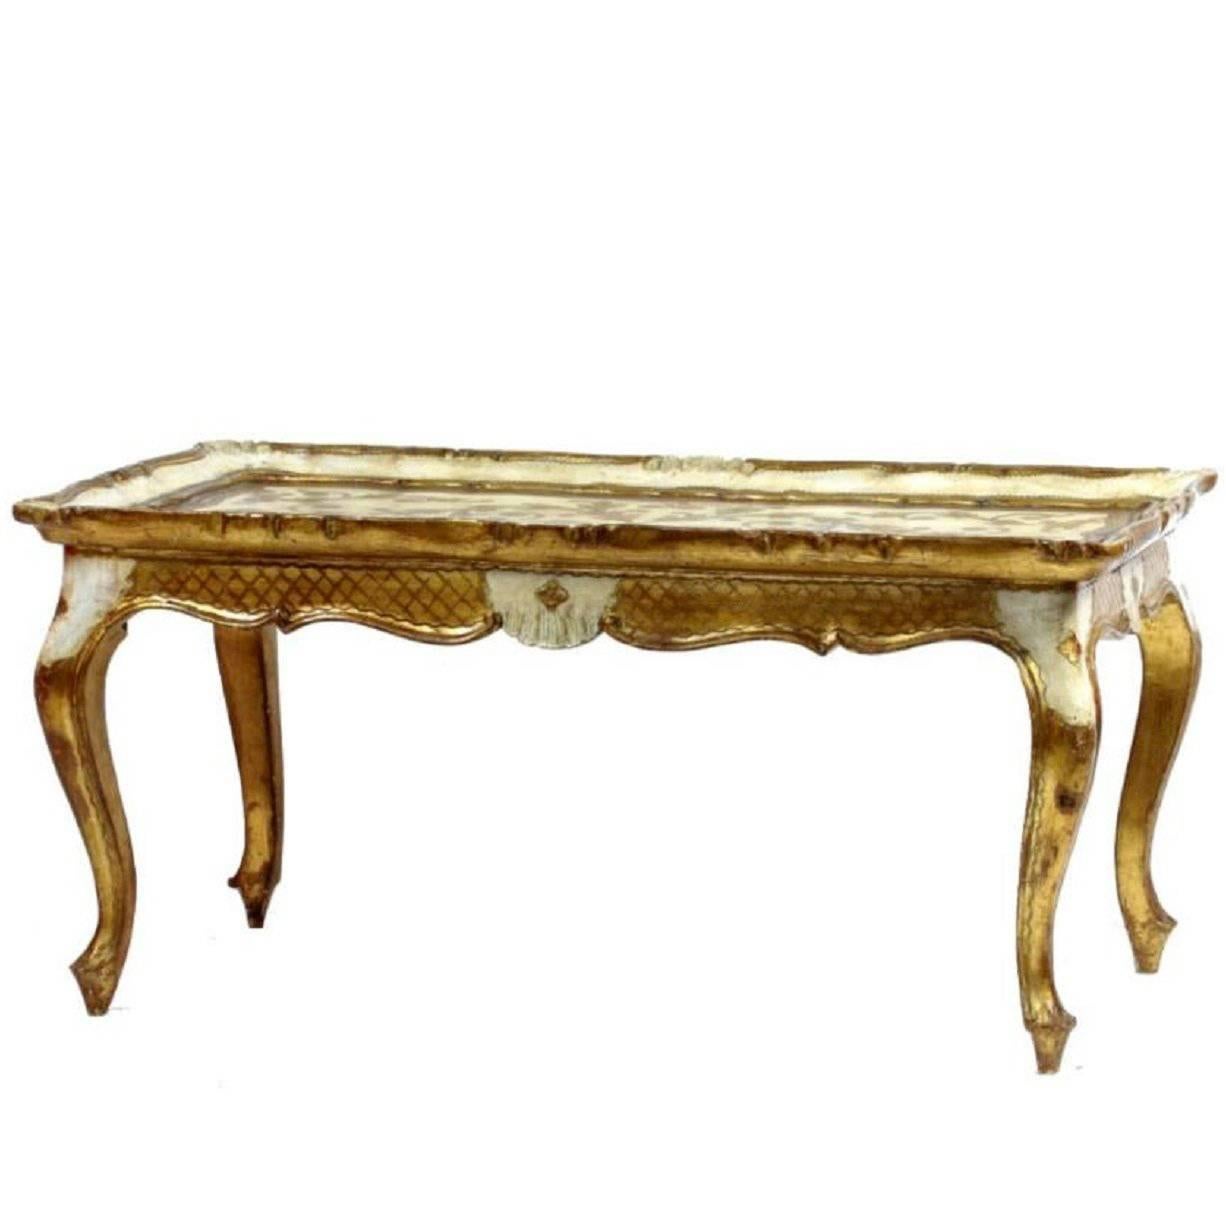 19th Century Venetian Rococo Hand-Painted and Giltwood Table For Sale